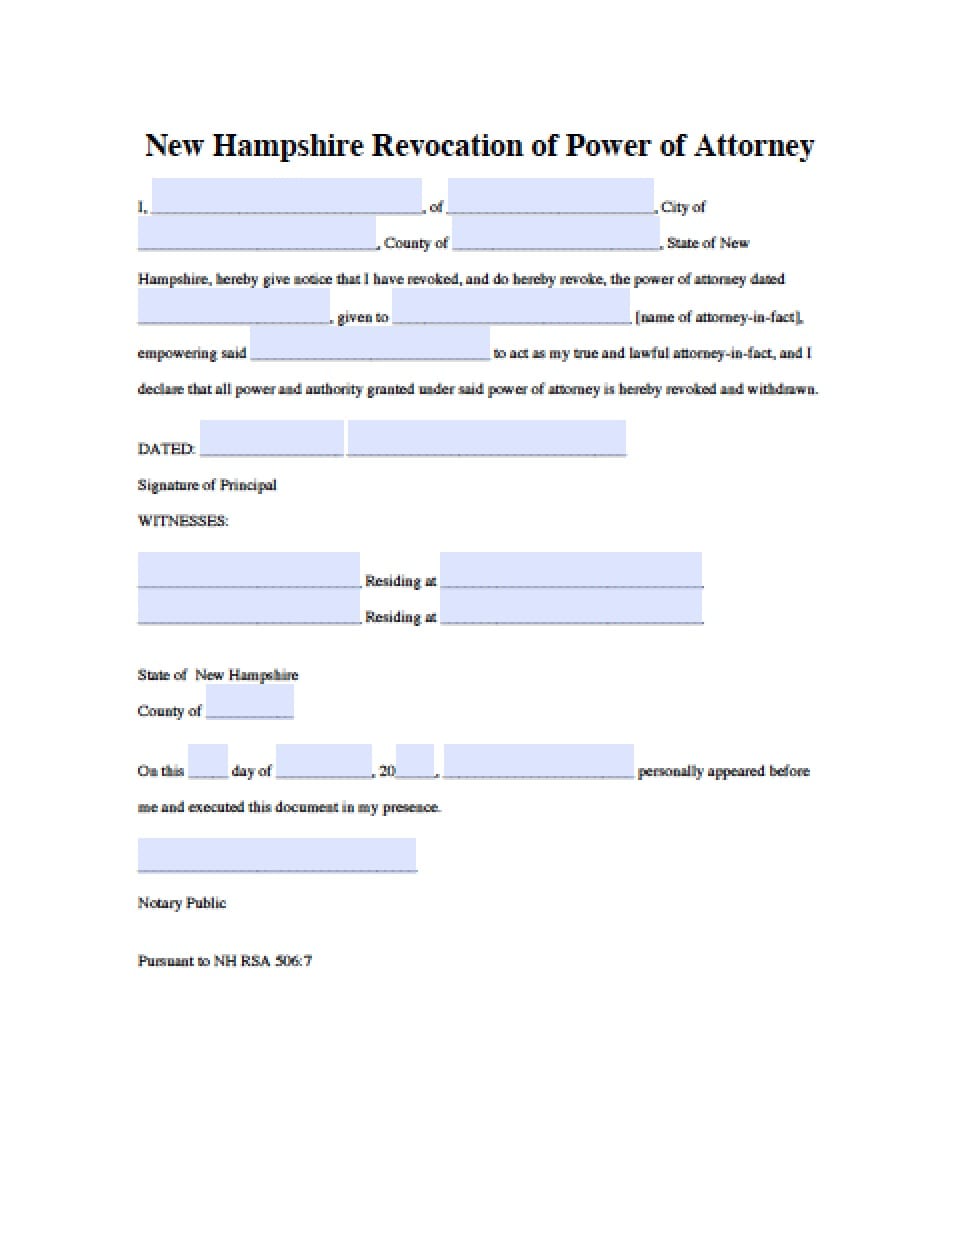 New Hampshire Revocation Power Of Attorney Form Power Of Attorney Power Of Attorney